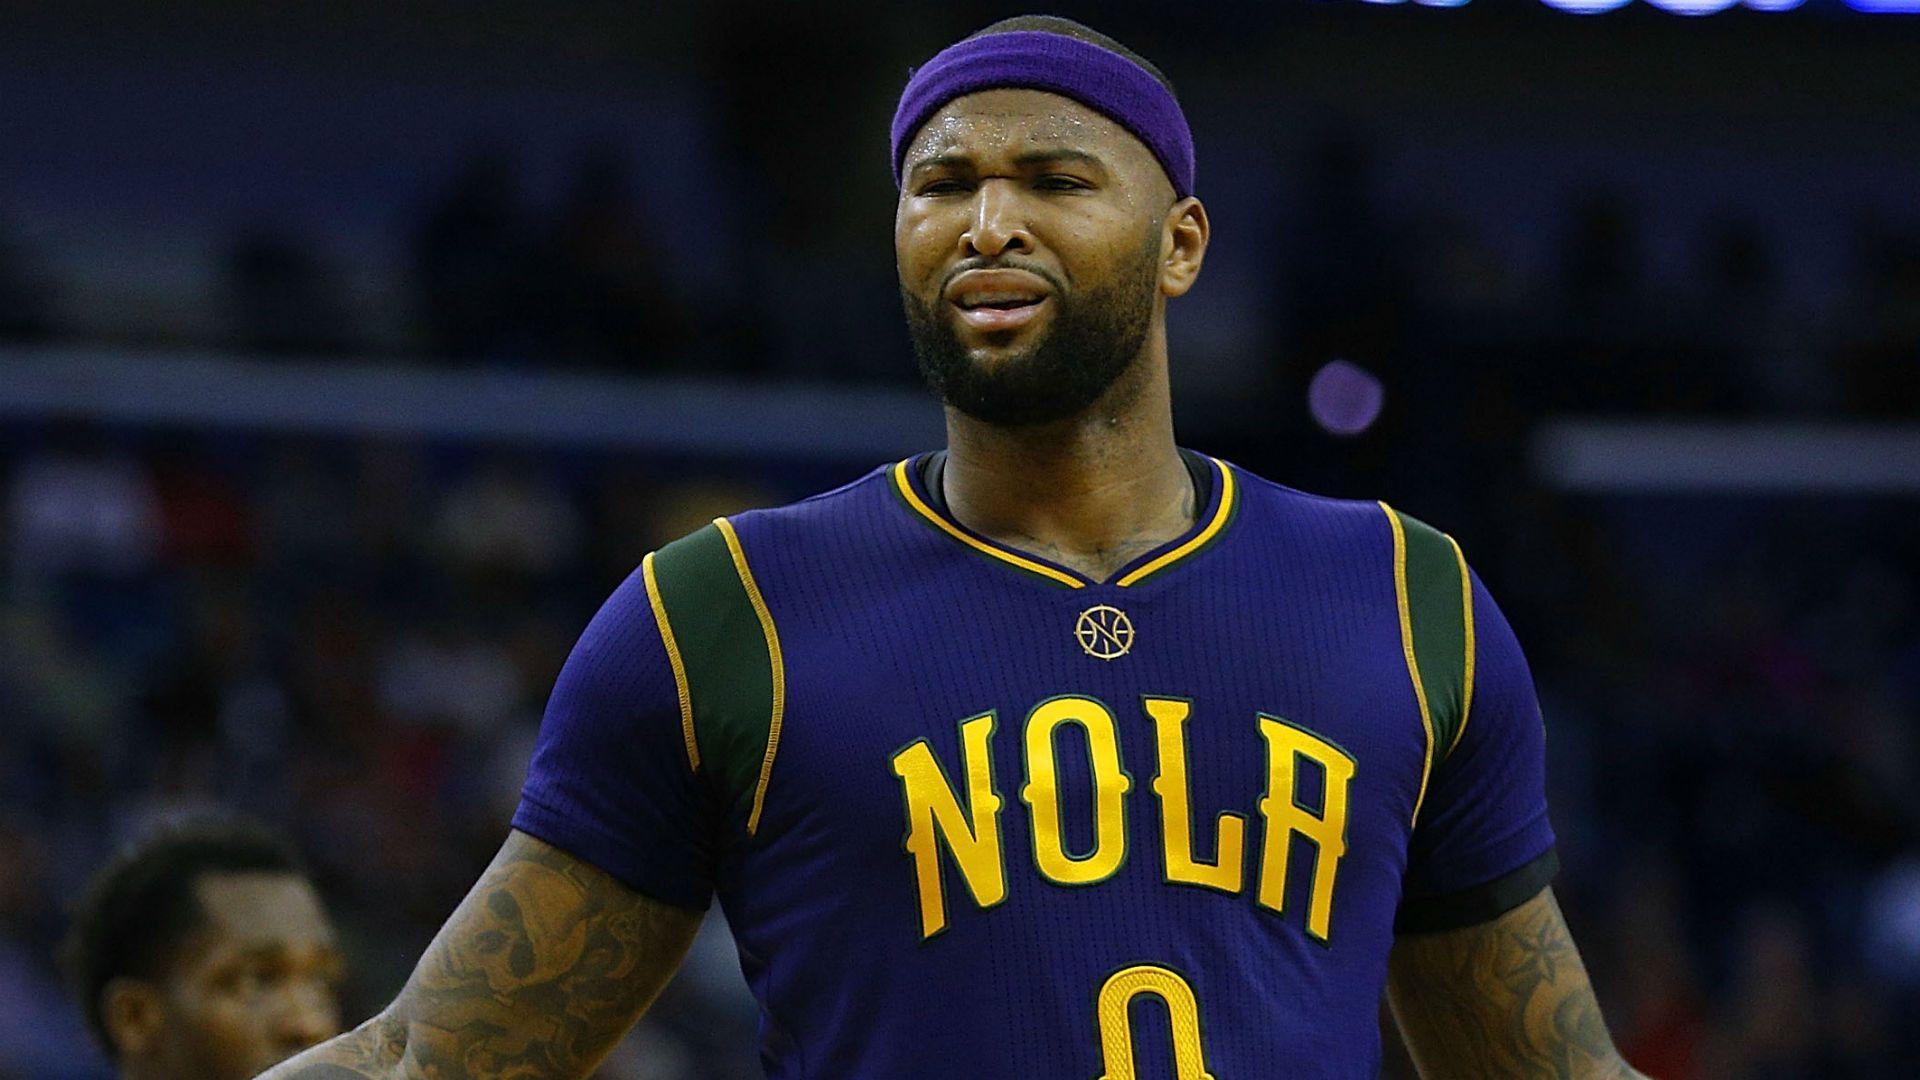 Pelicans win again without DeMarcus Cousins, upset Rockets. NBA